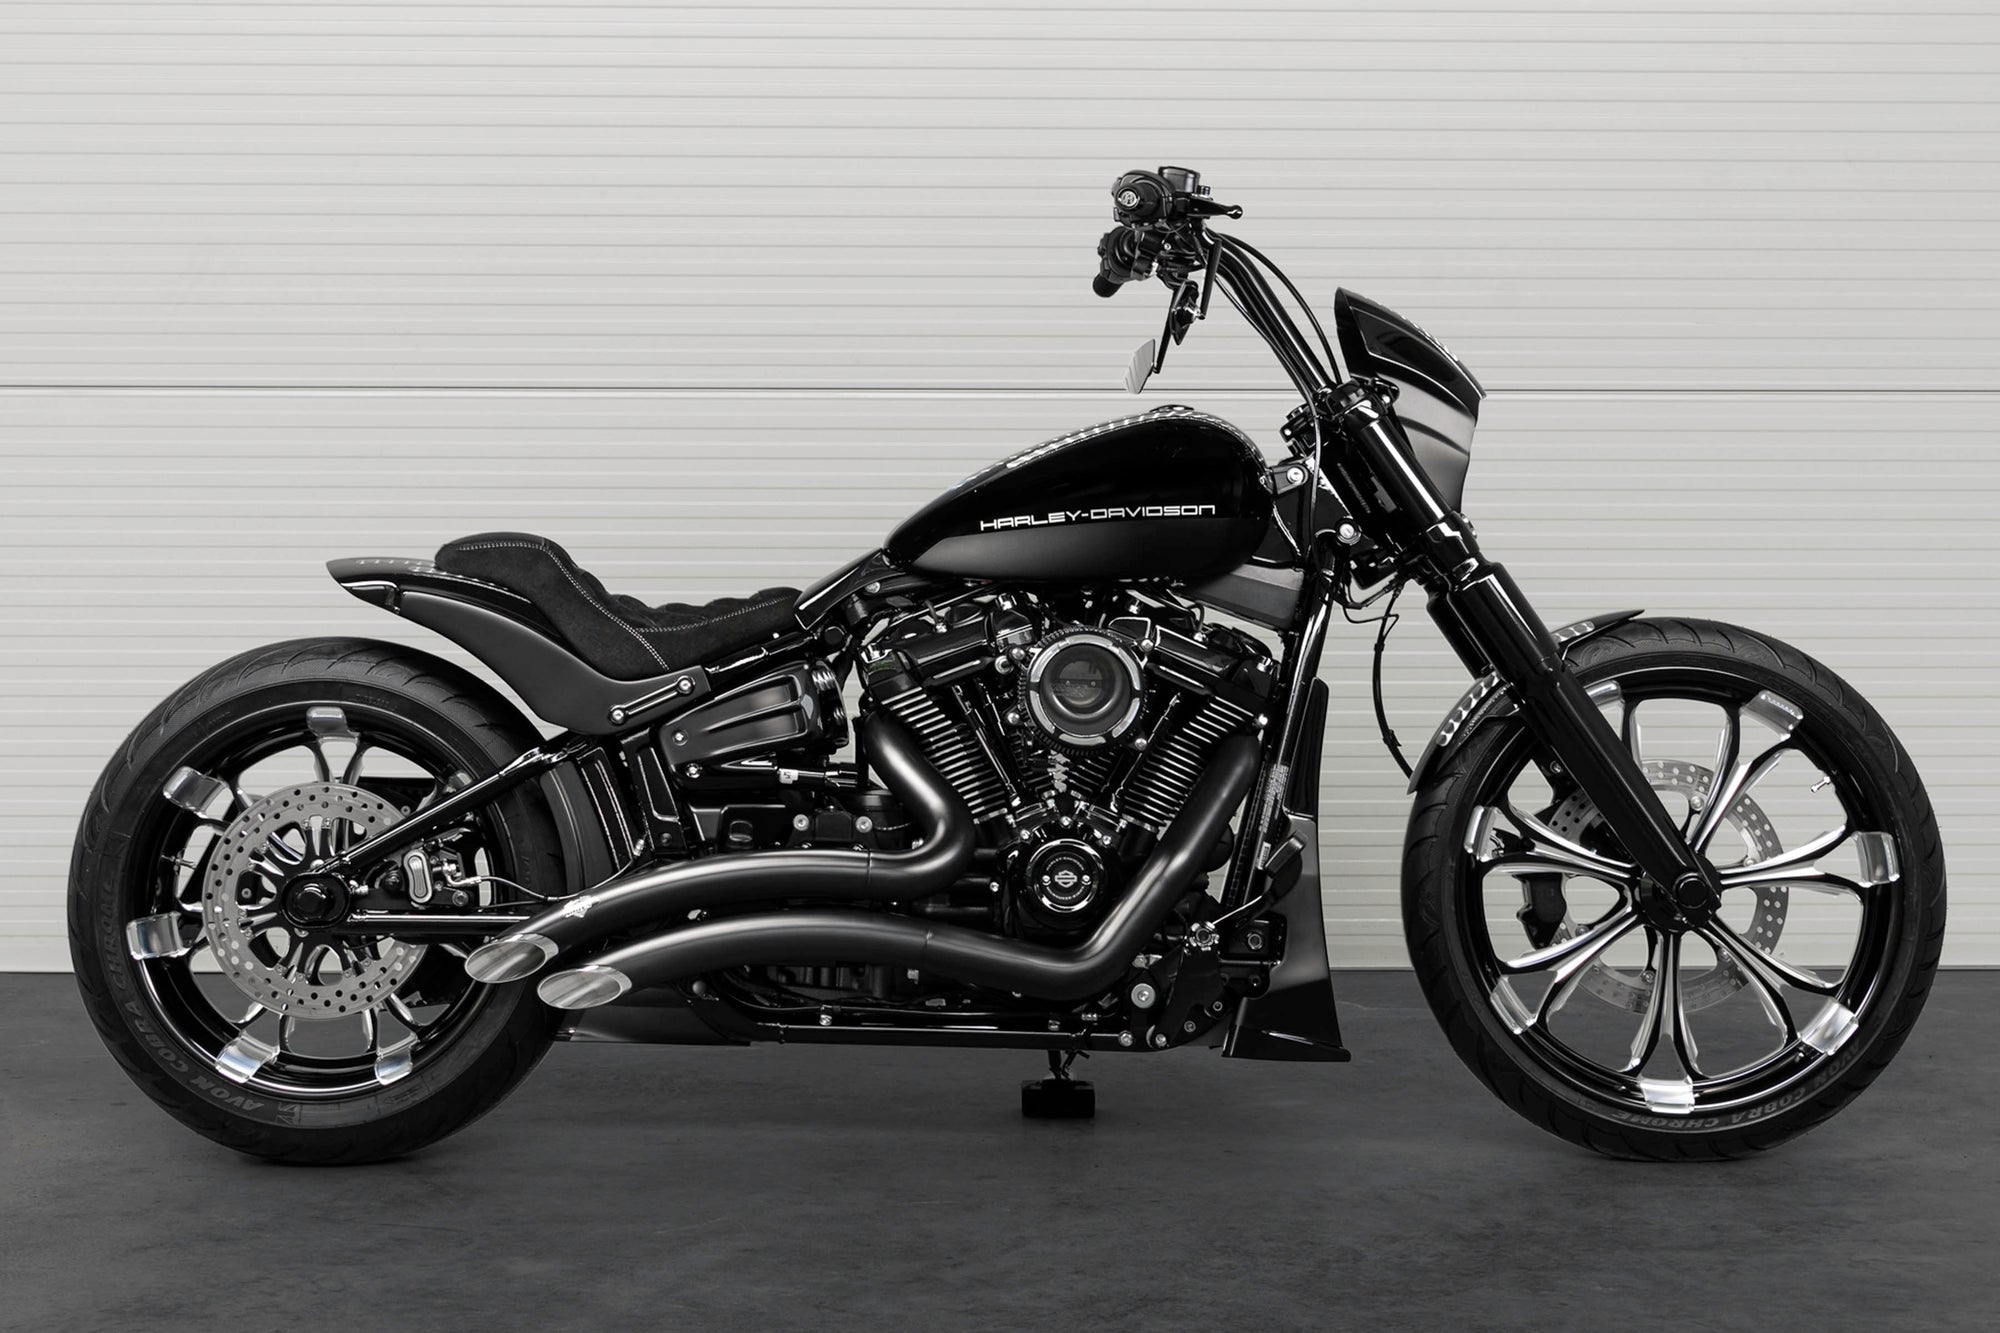 Modified Harley Davidson Breakout motorcycle with Killer Custom parts from the side in a white modern bike shop